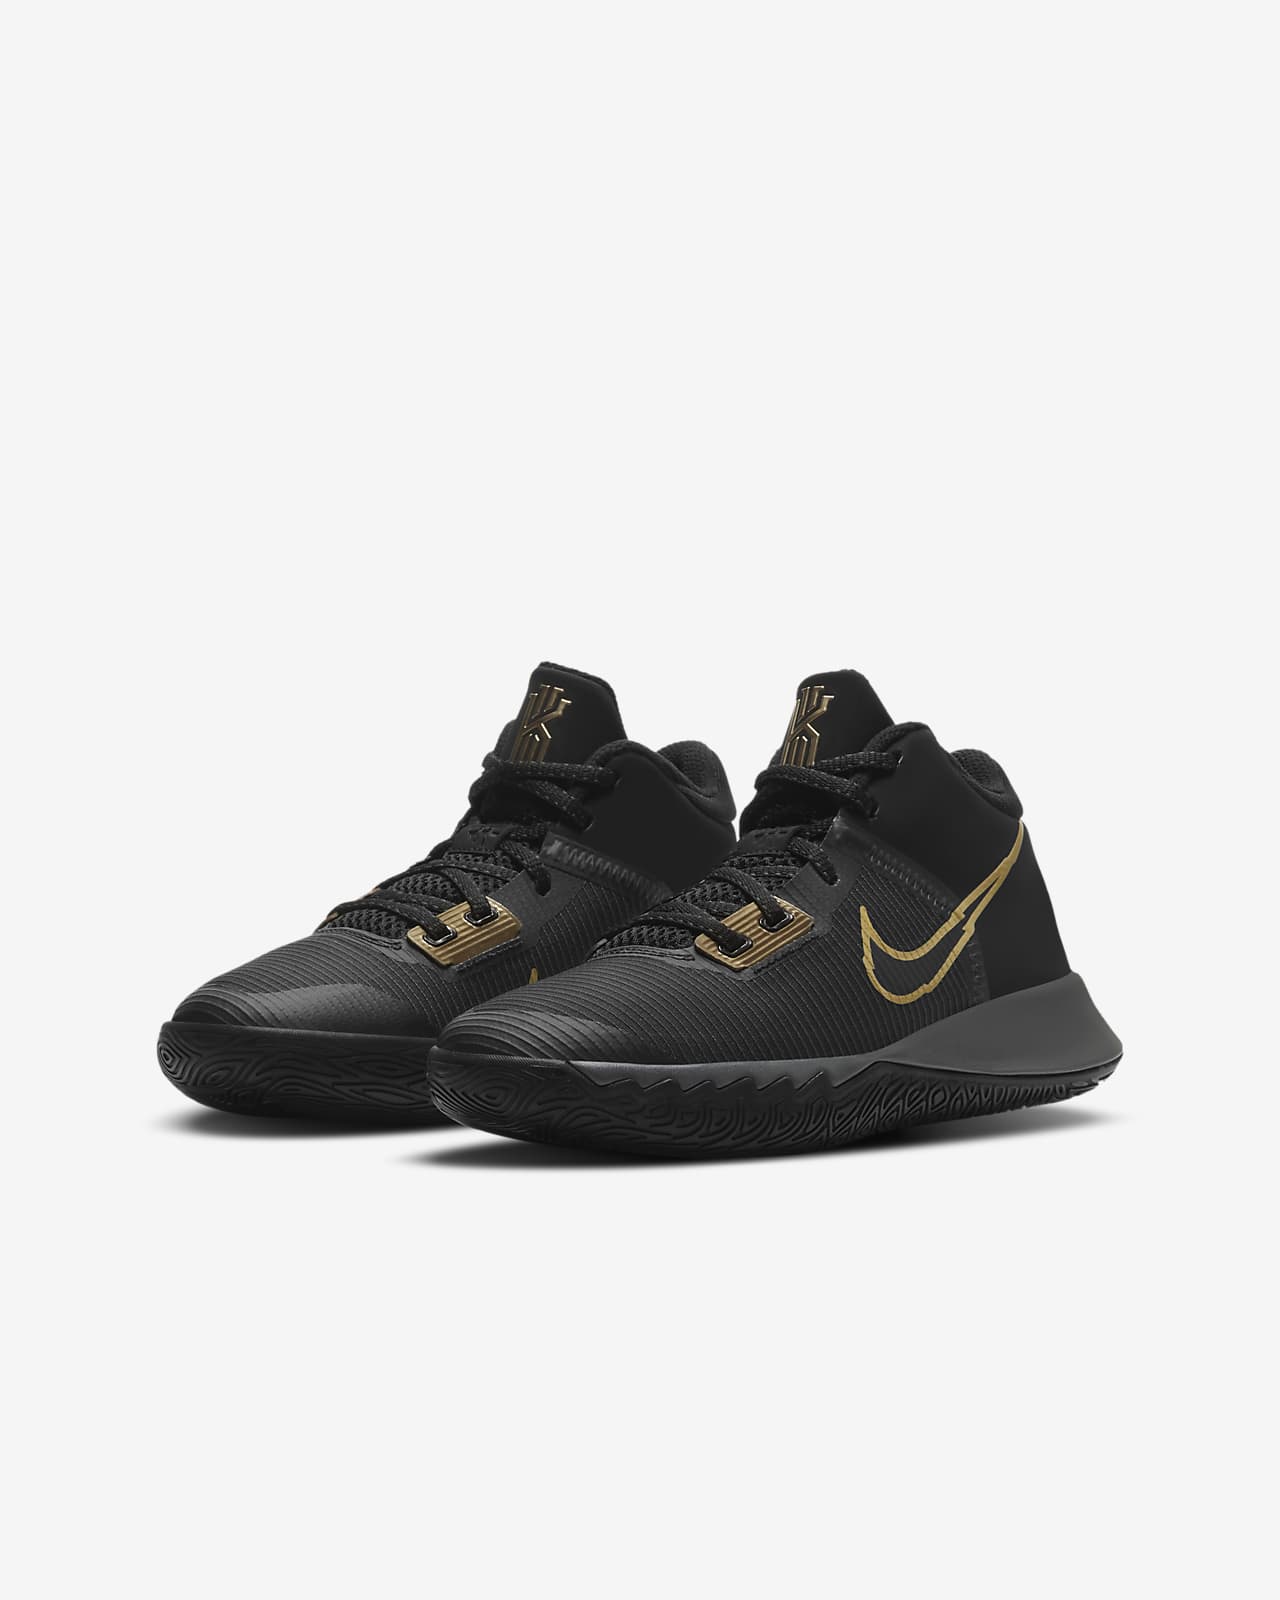 kyrie shoes black and gold